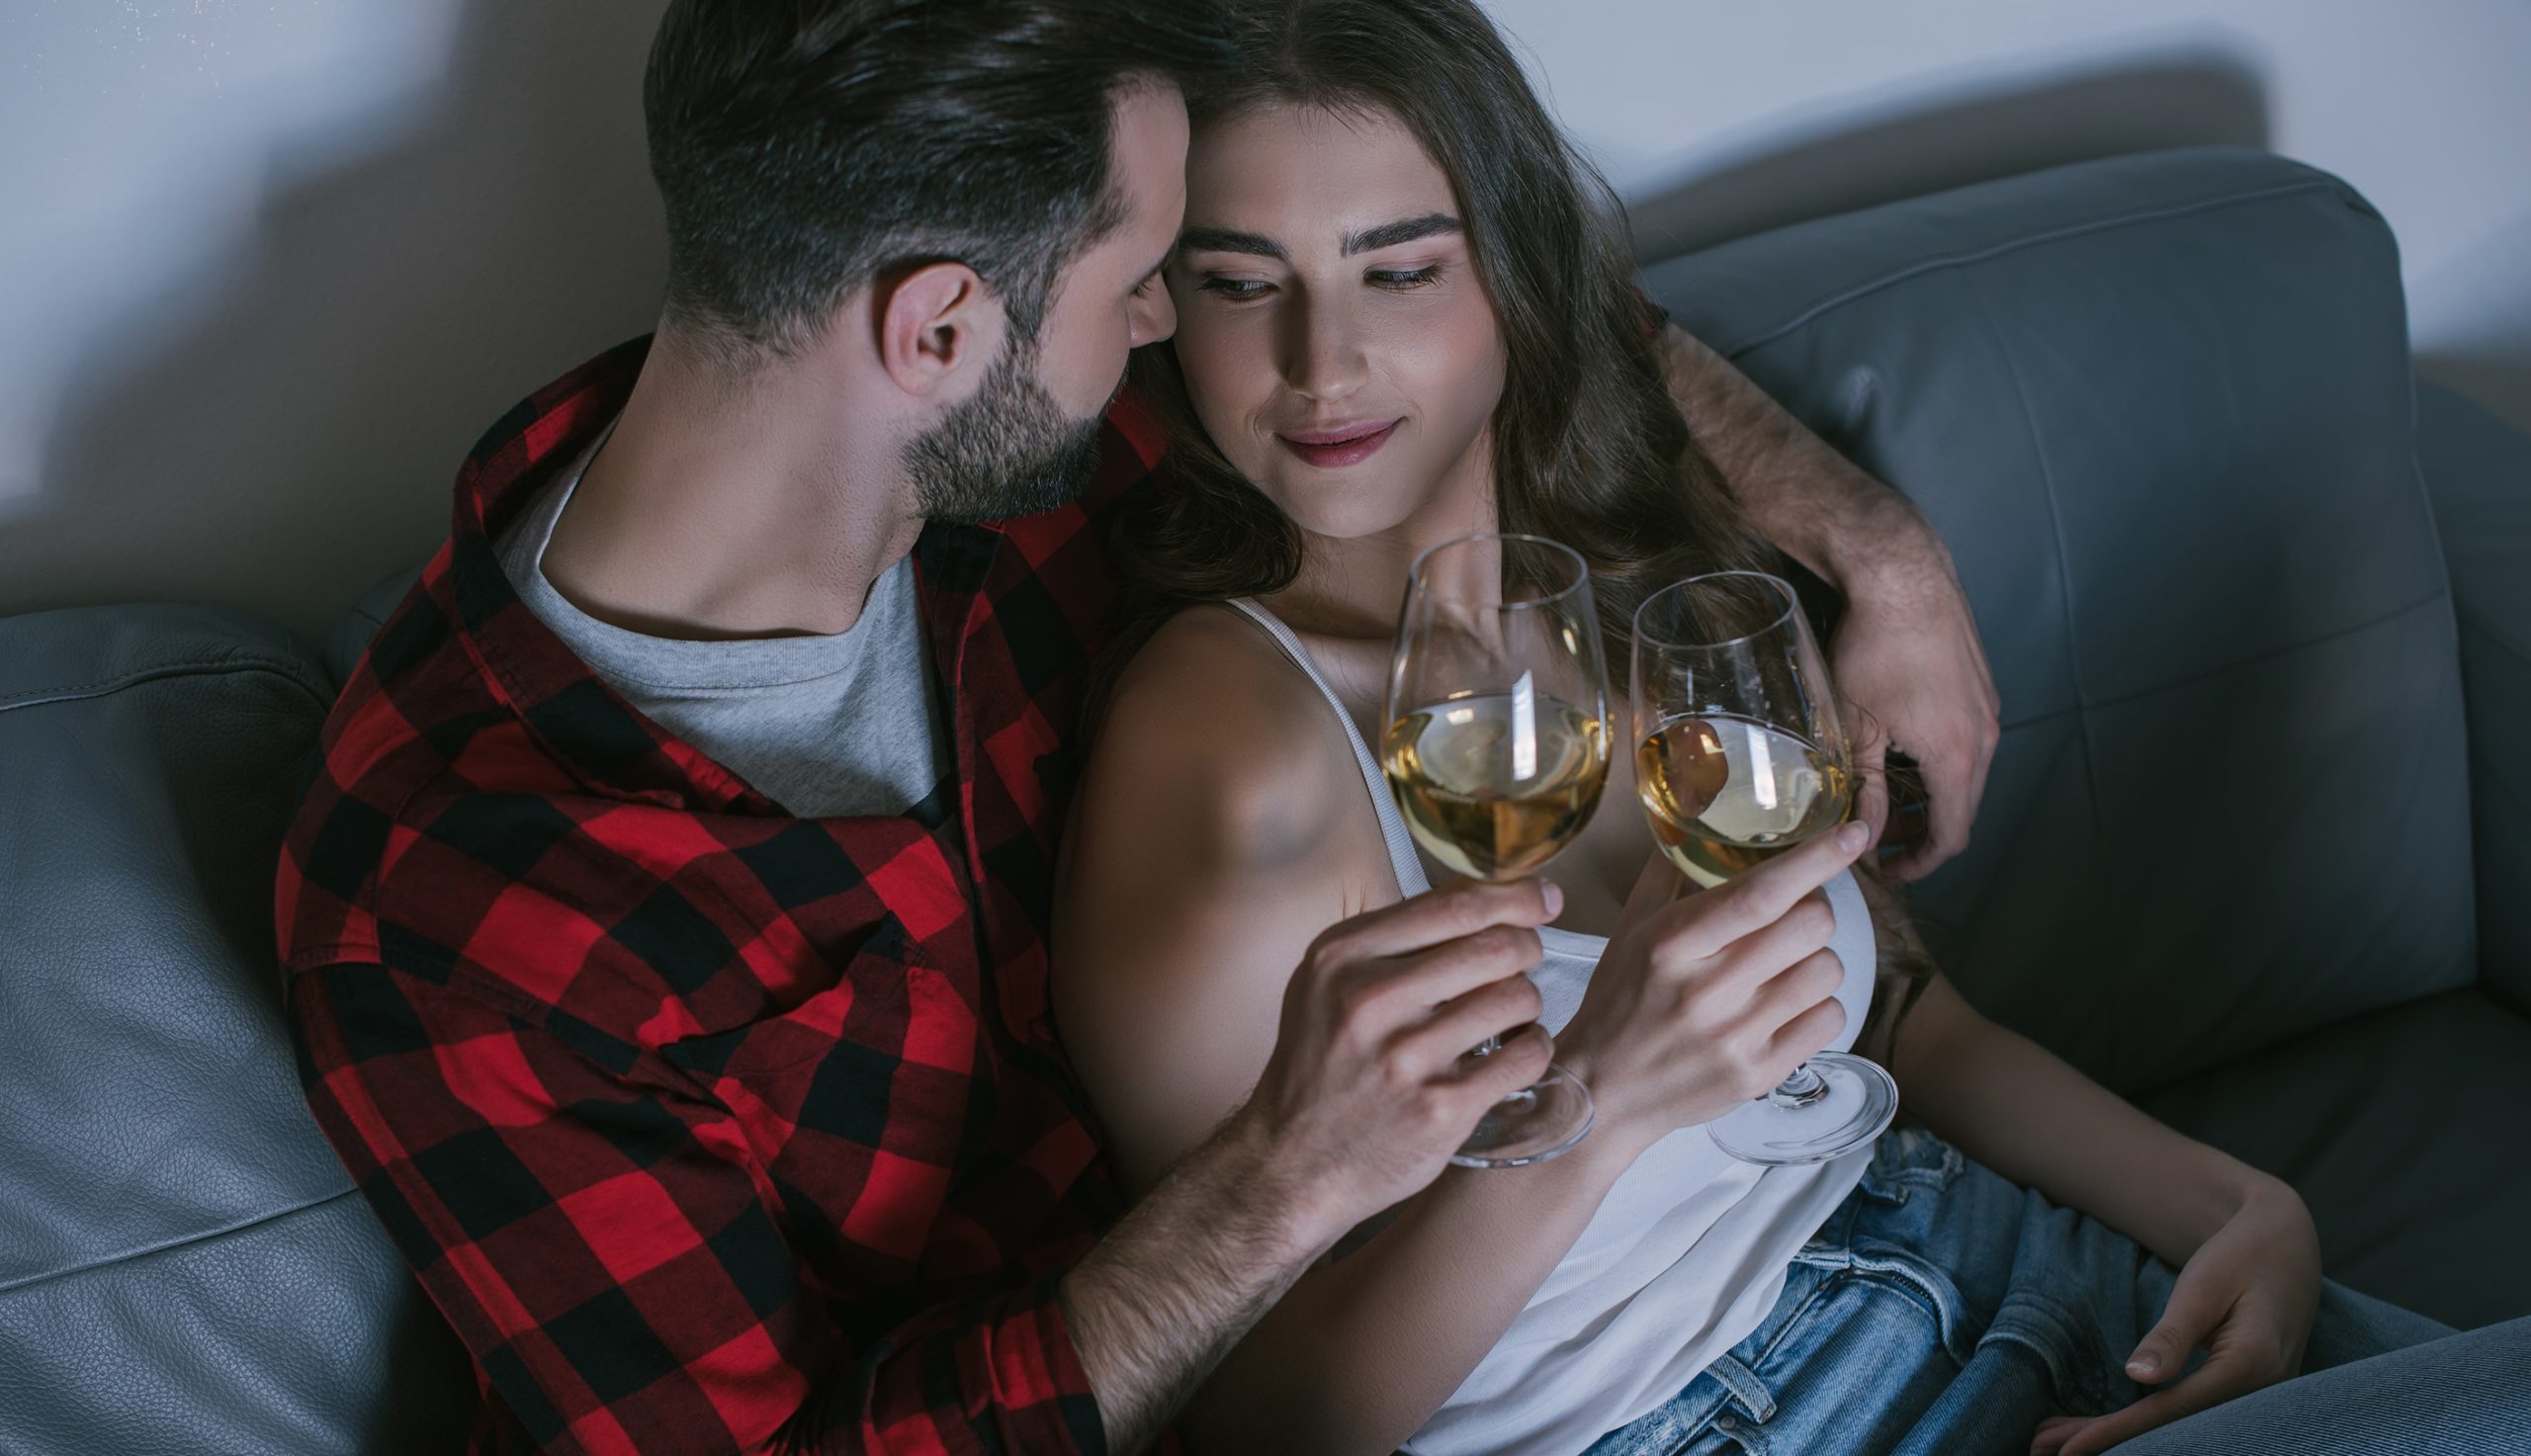 23 Ways to Get Someone to Have Sex With You, Be It a Stranger or Friend pic